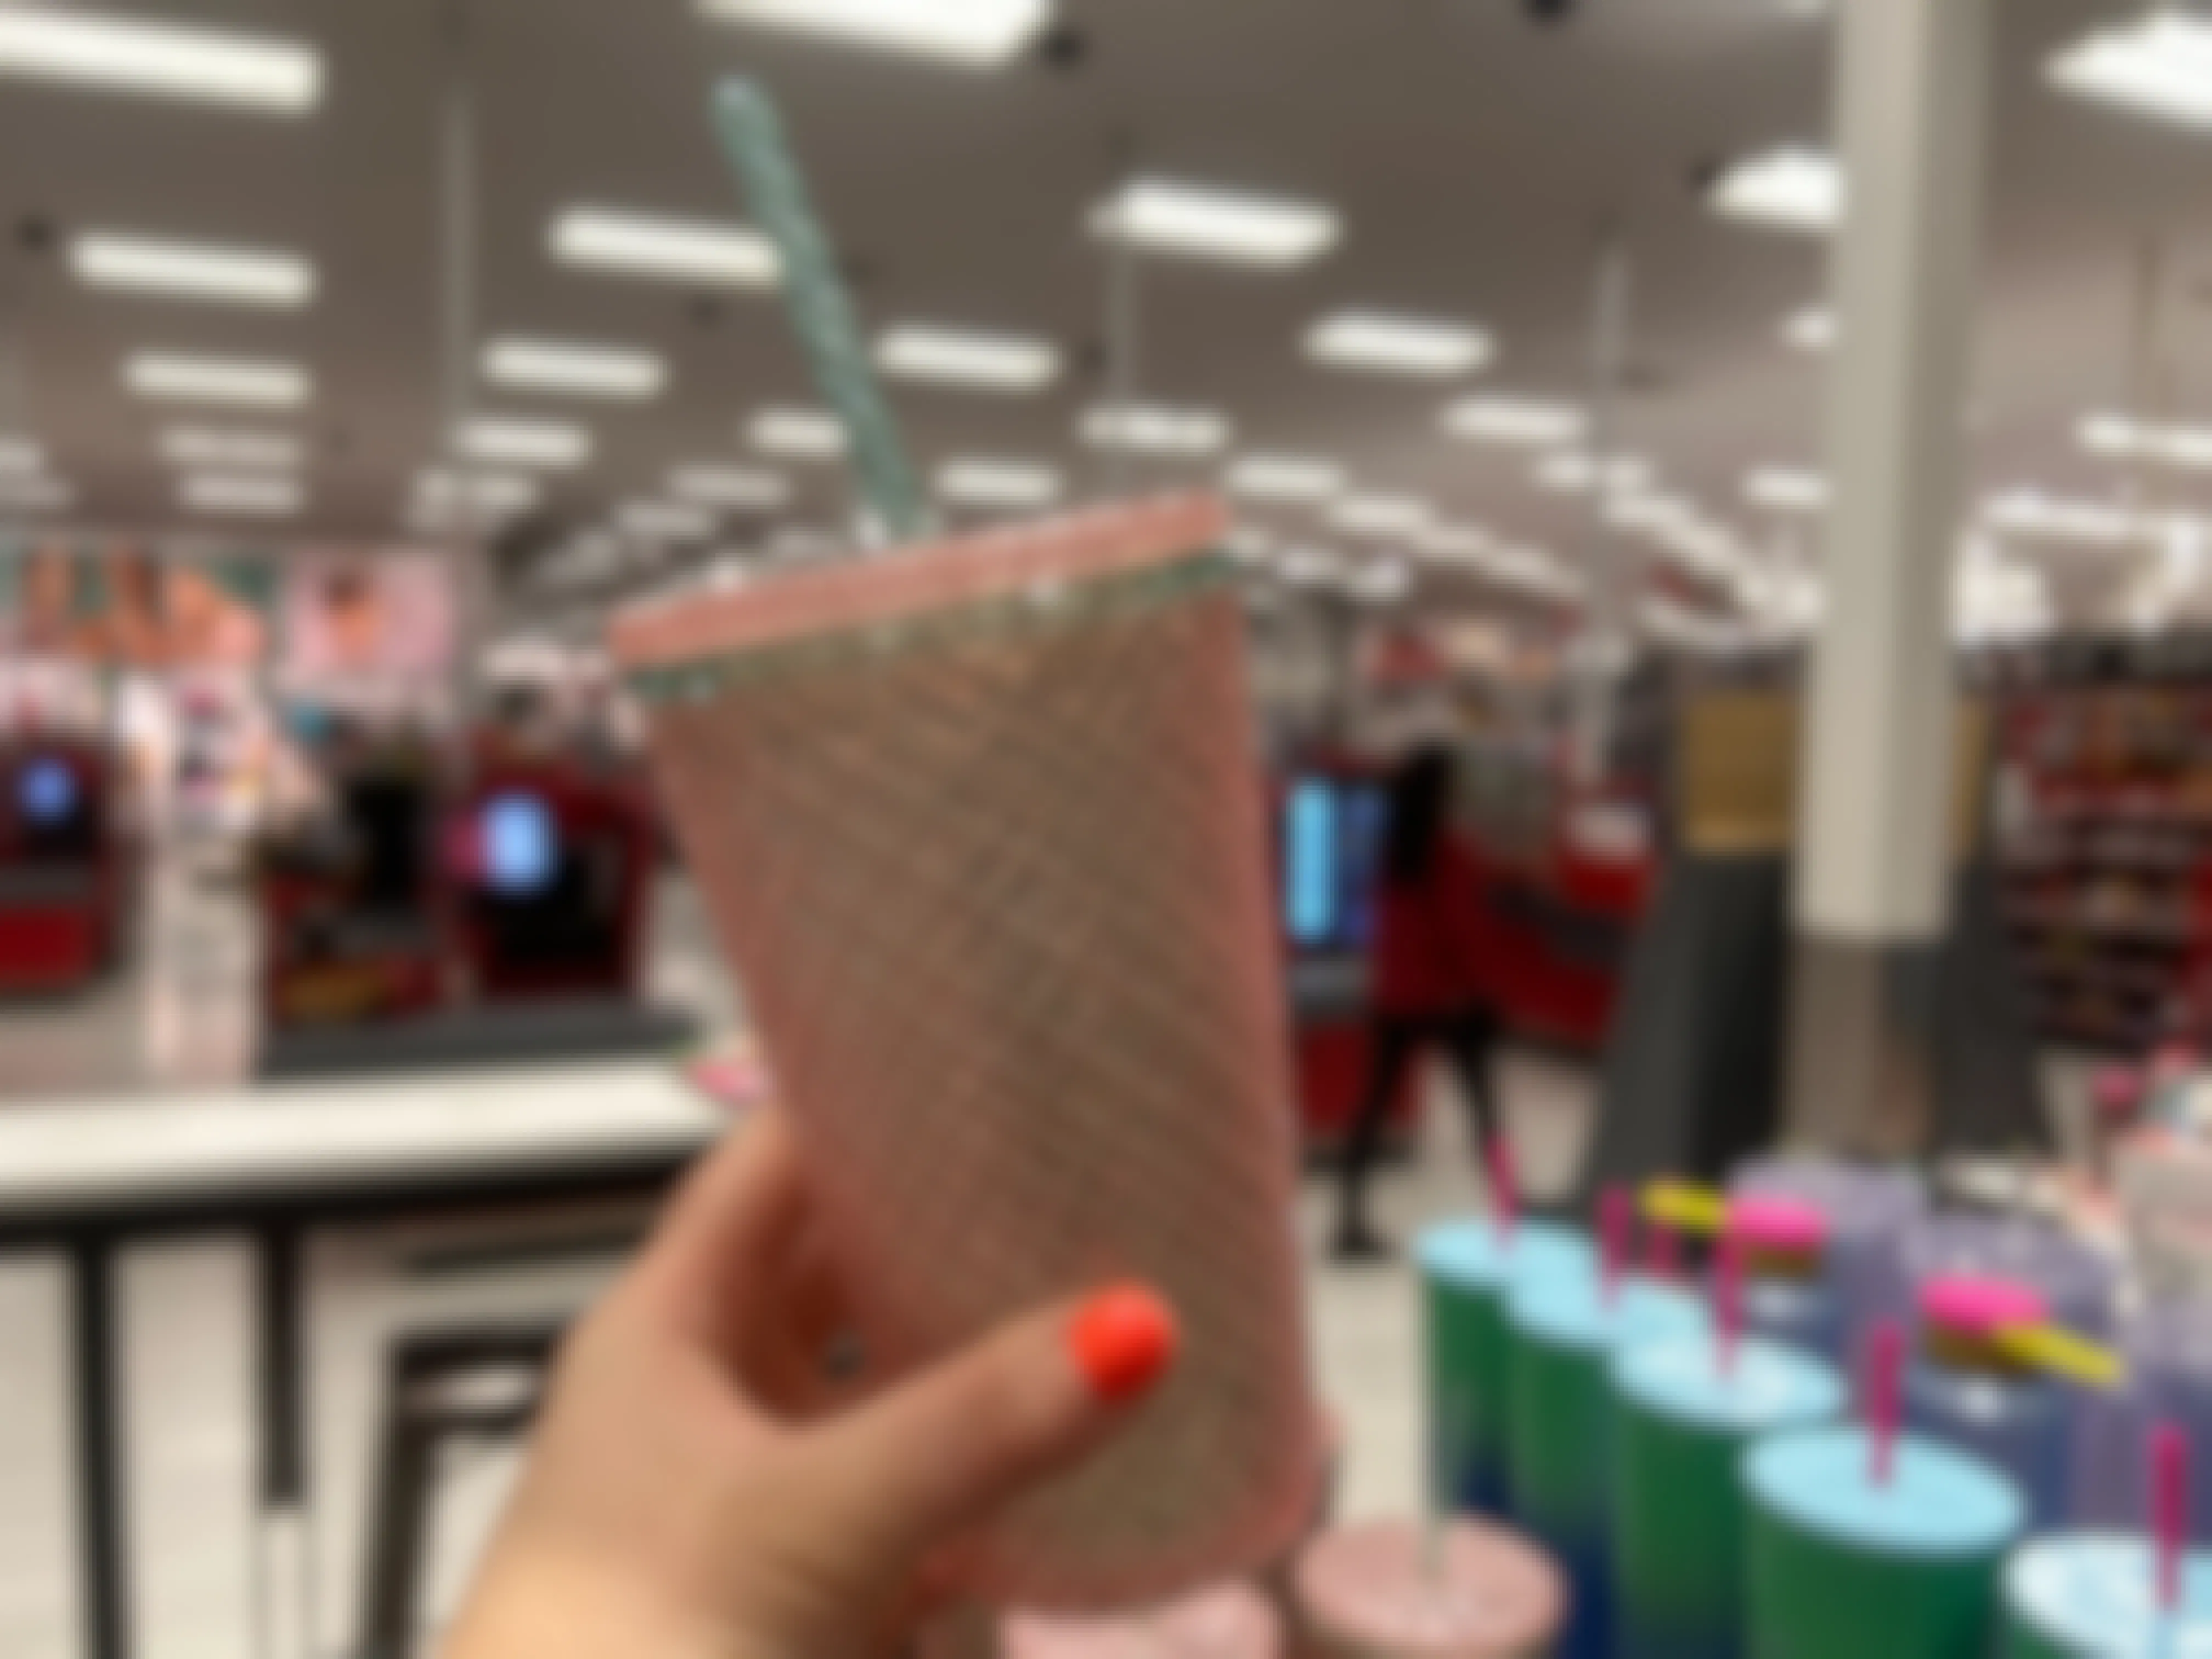 person holding an exclusive starbucks summer cup at a target. the cup is a pink and green grid cold cup